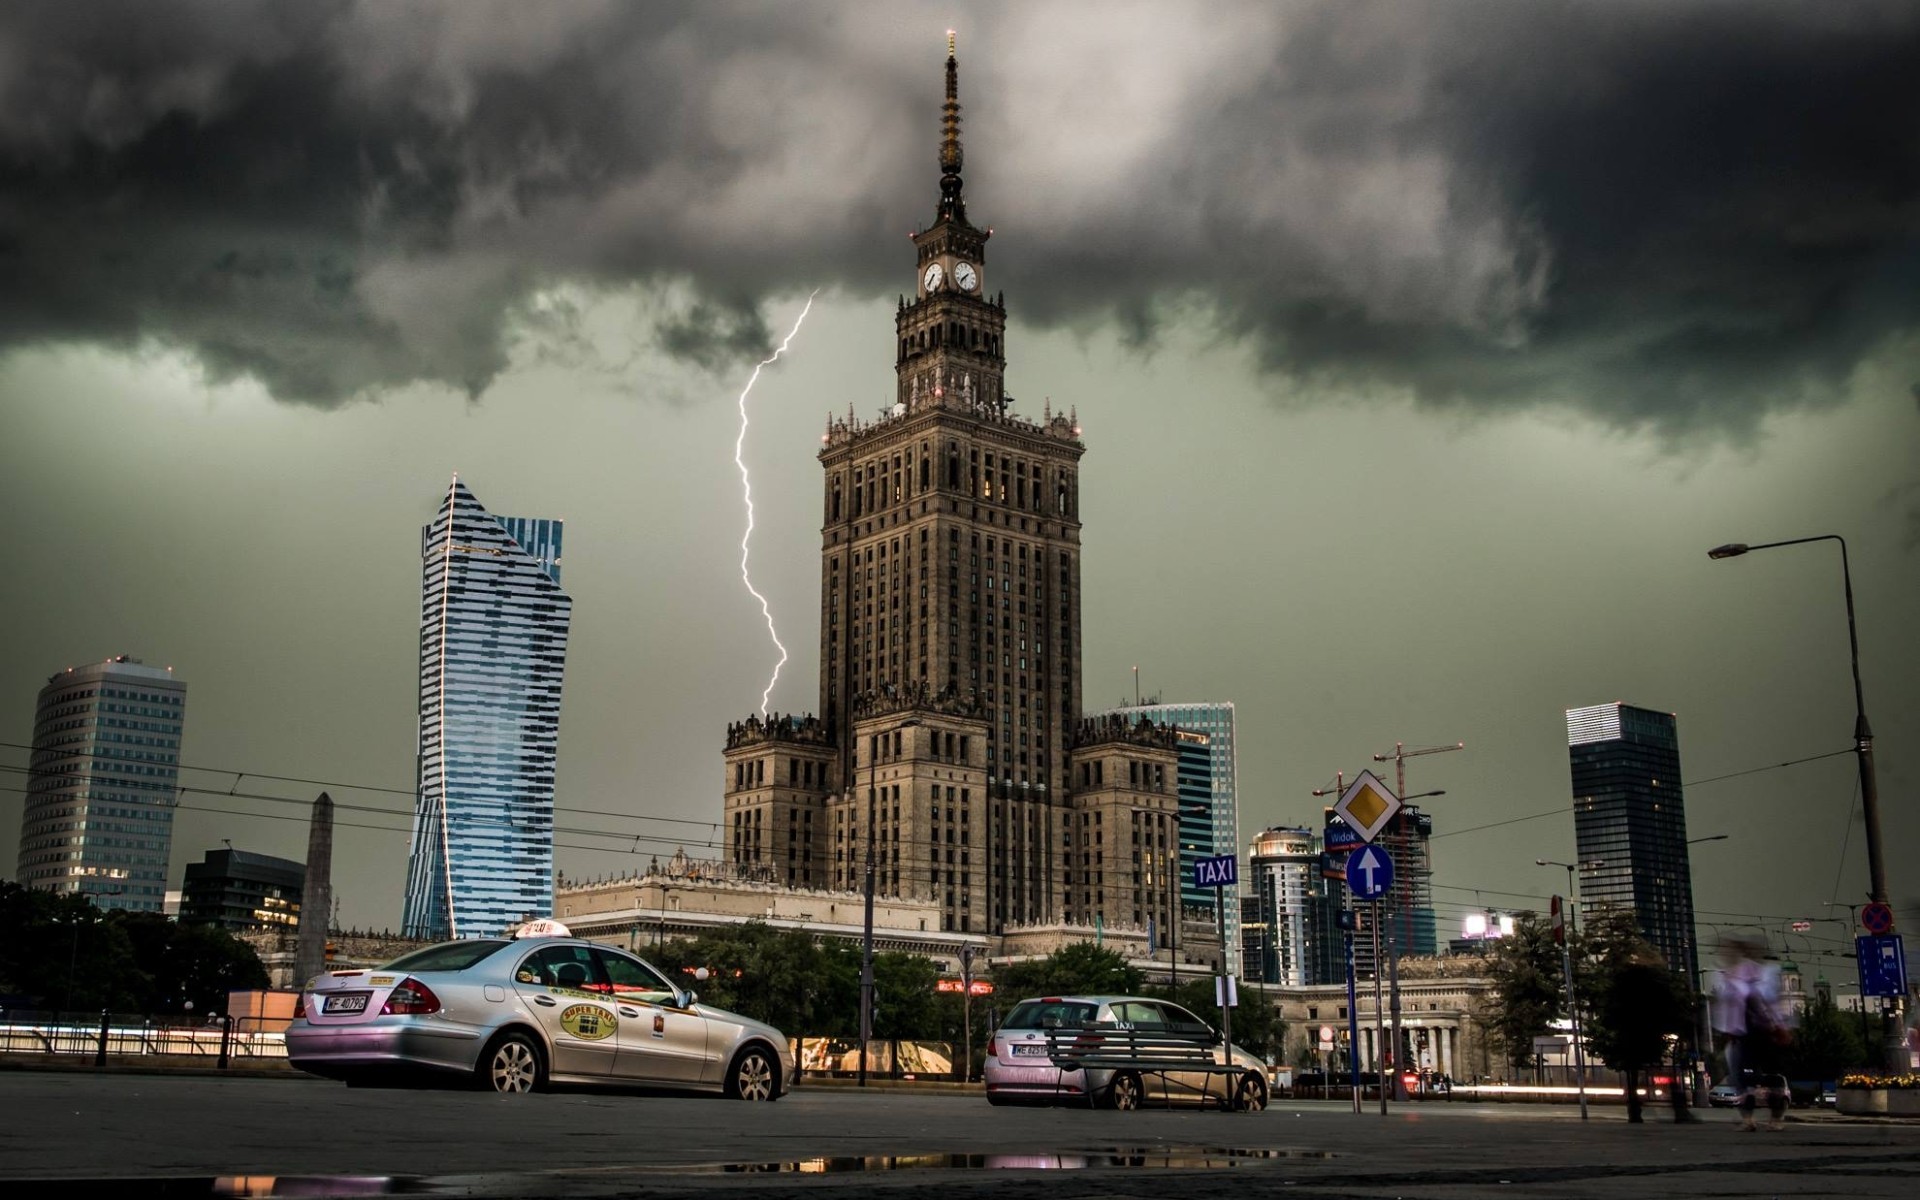 General 1920x1200 city cityscape clouds lightning building architecture car clock tower Warsaw Poland Polish Palace of Culture and Science vehicle sky